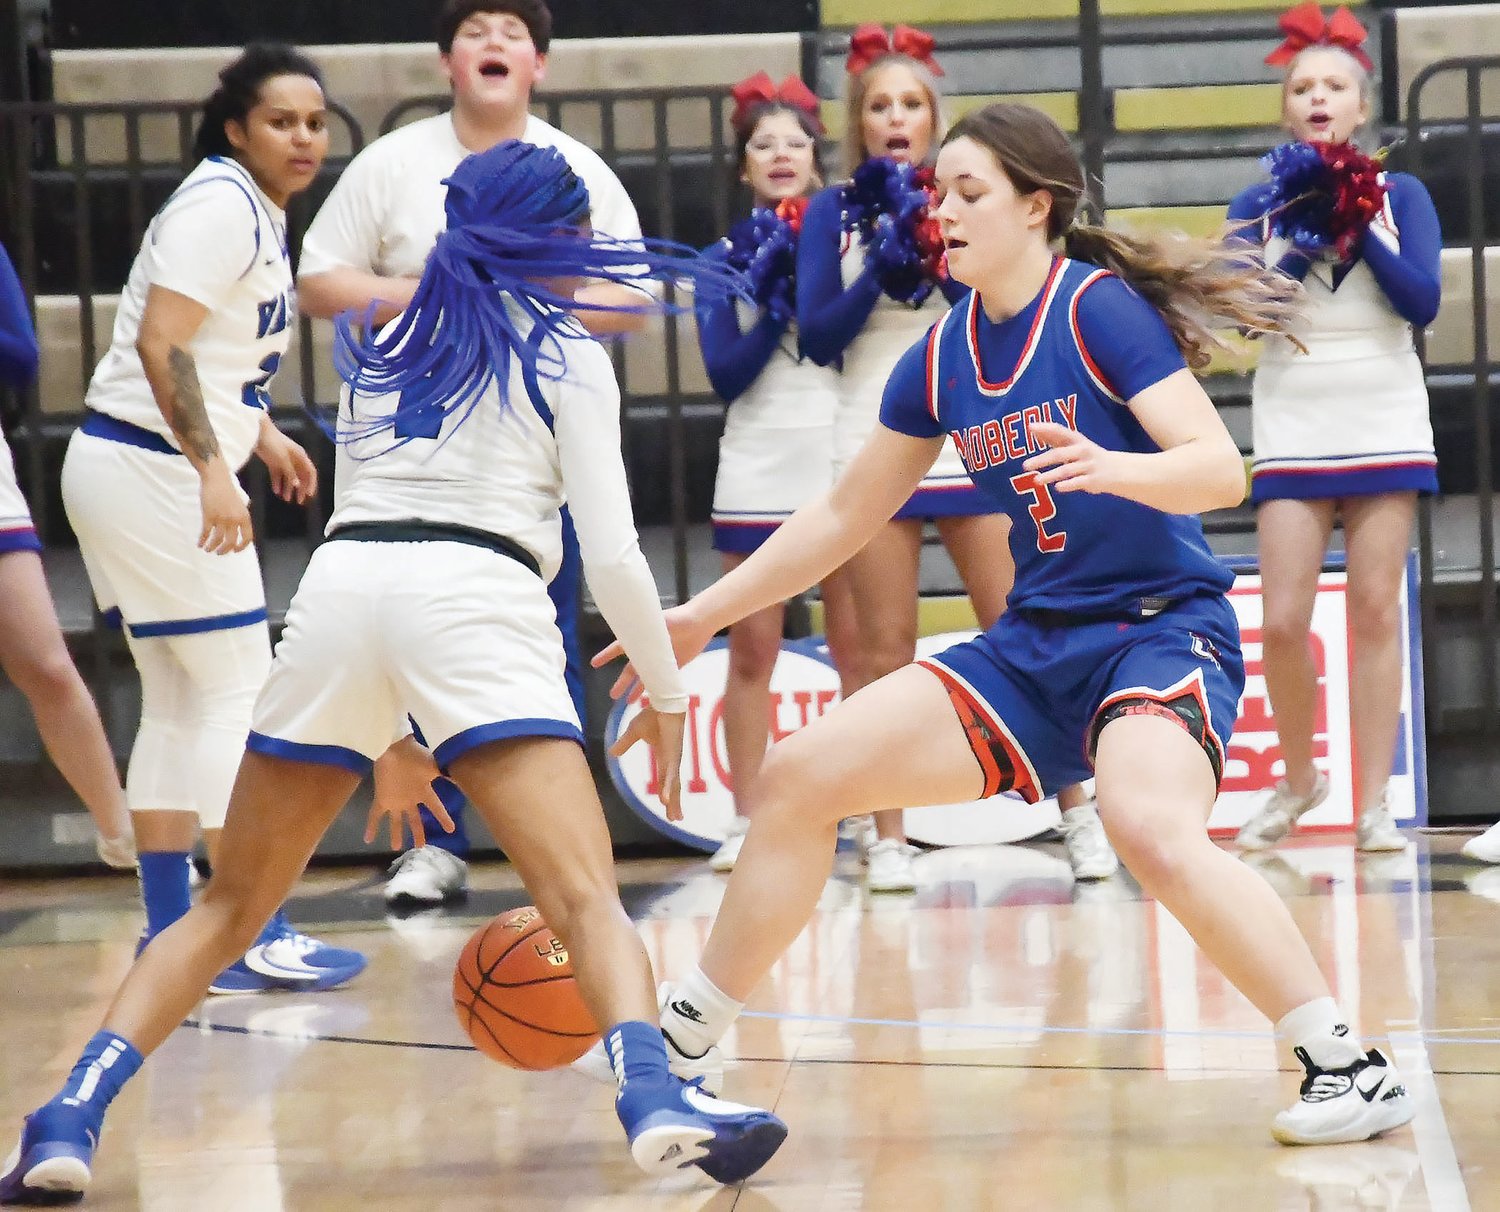 Moberly's Grace Billington plays defense during the Class 4 quarterfinal game at St. Charles Saturday, March 11.